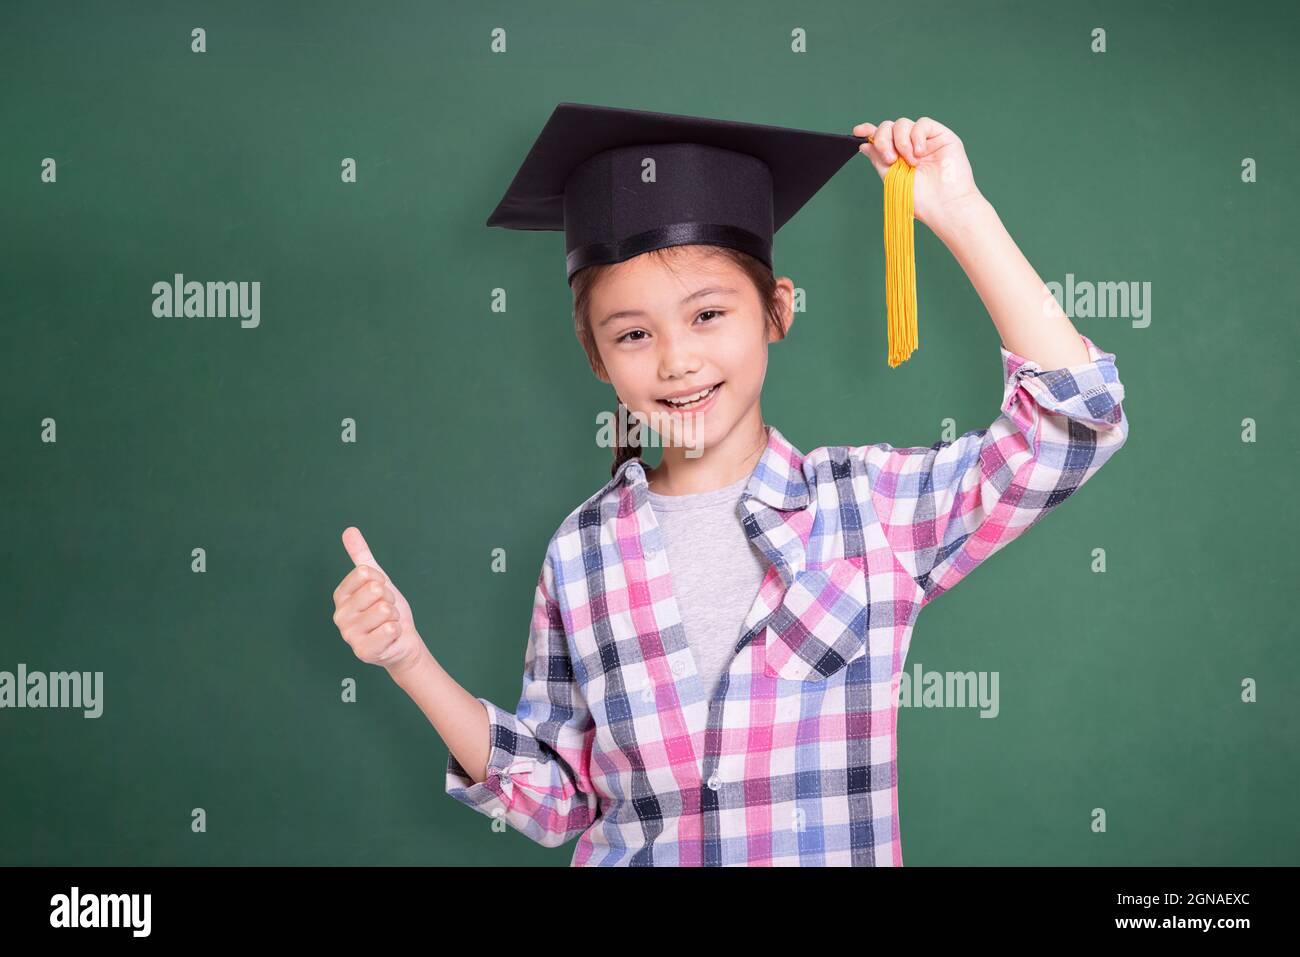 Happy student girl wearing graduation cap and showing thumb up.Isolated on green chalkboard background. Stock Photo